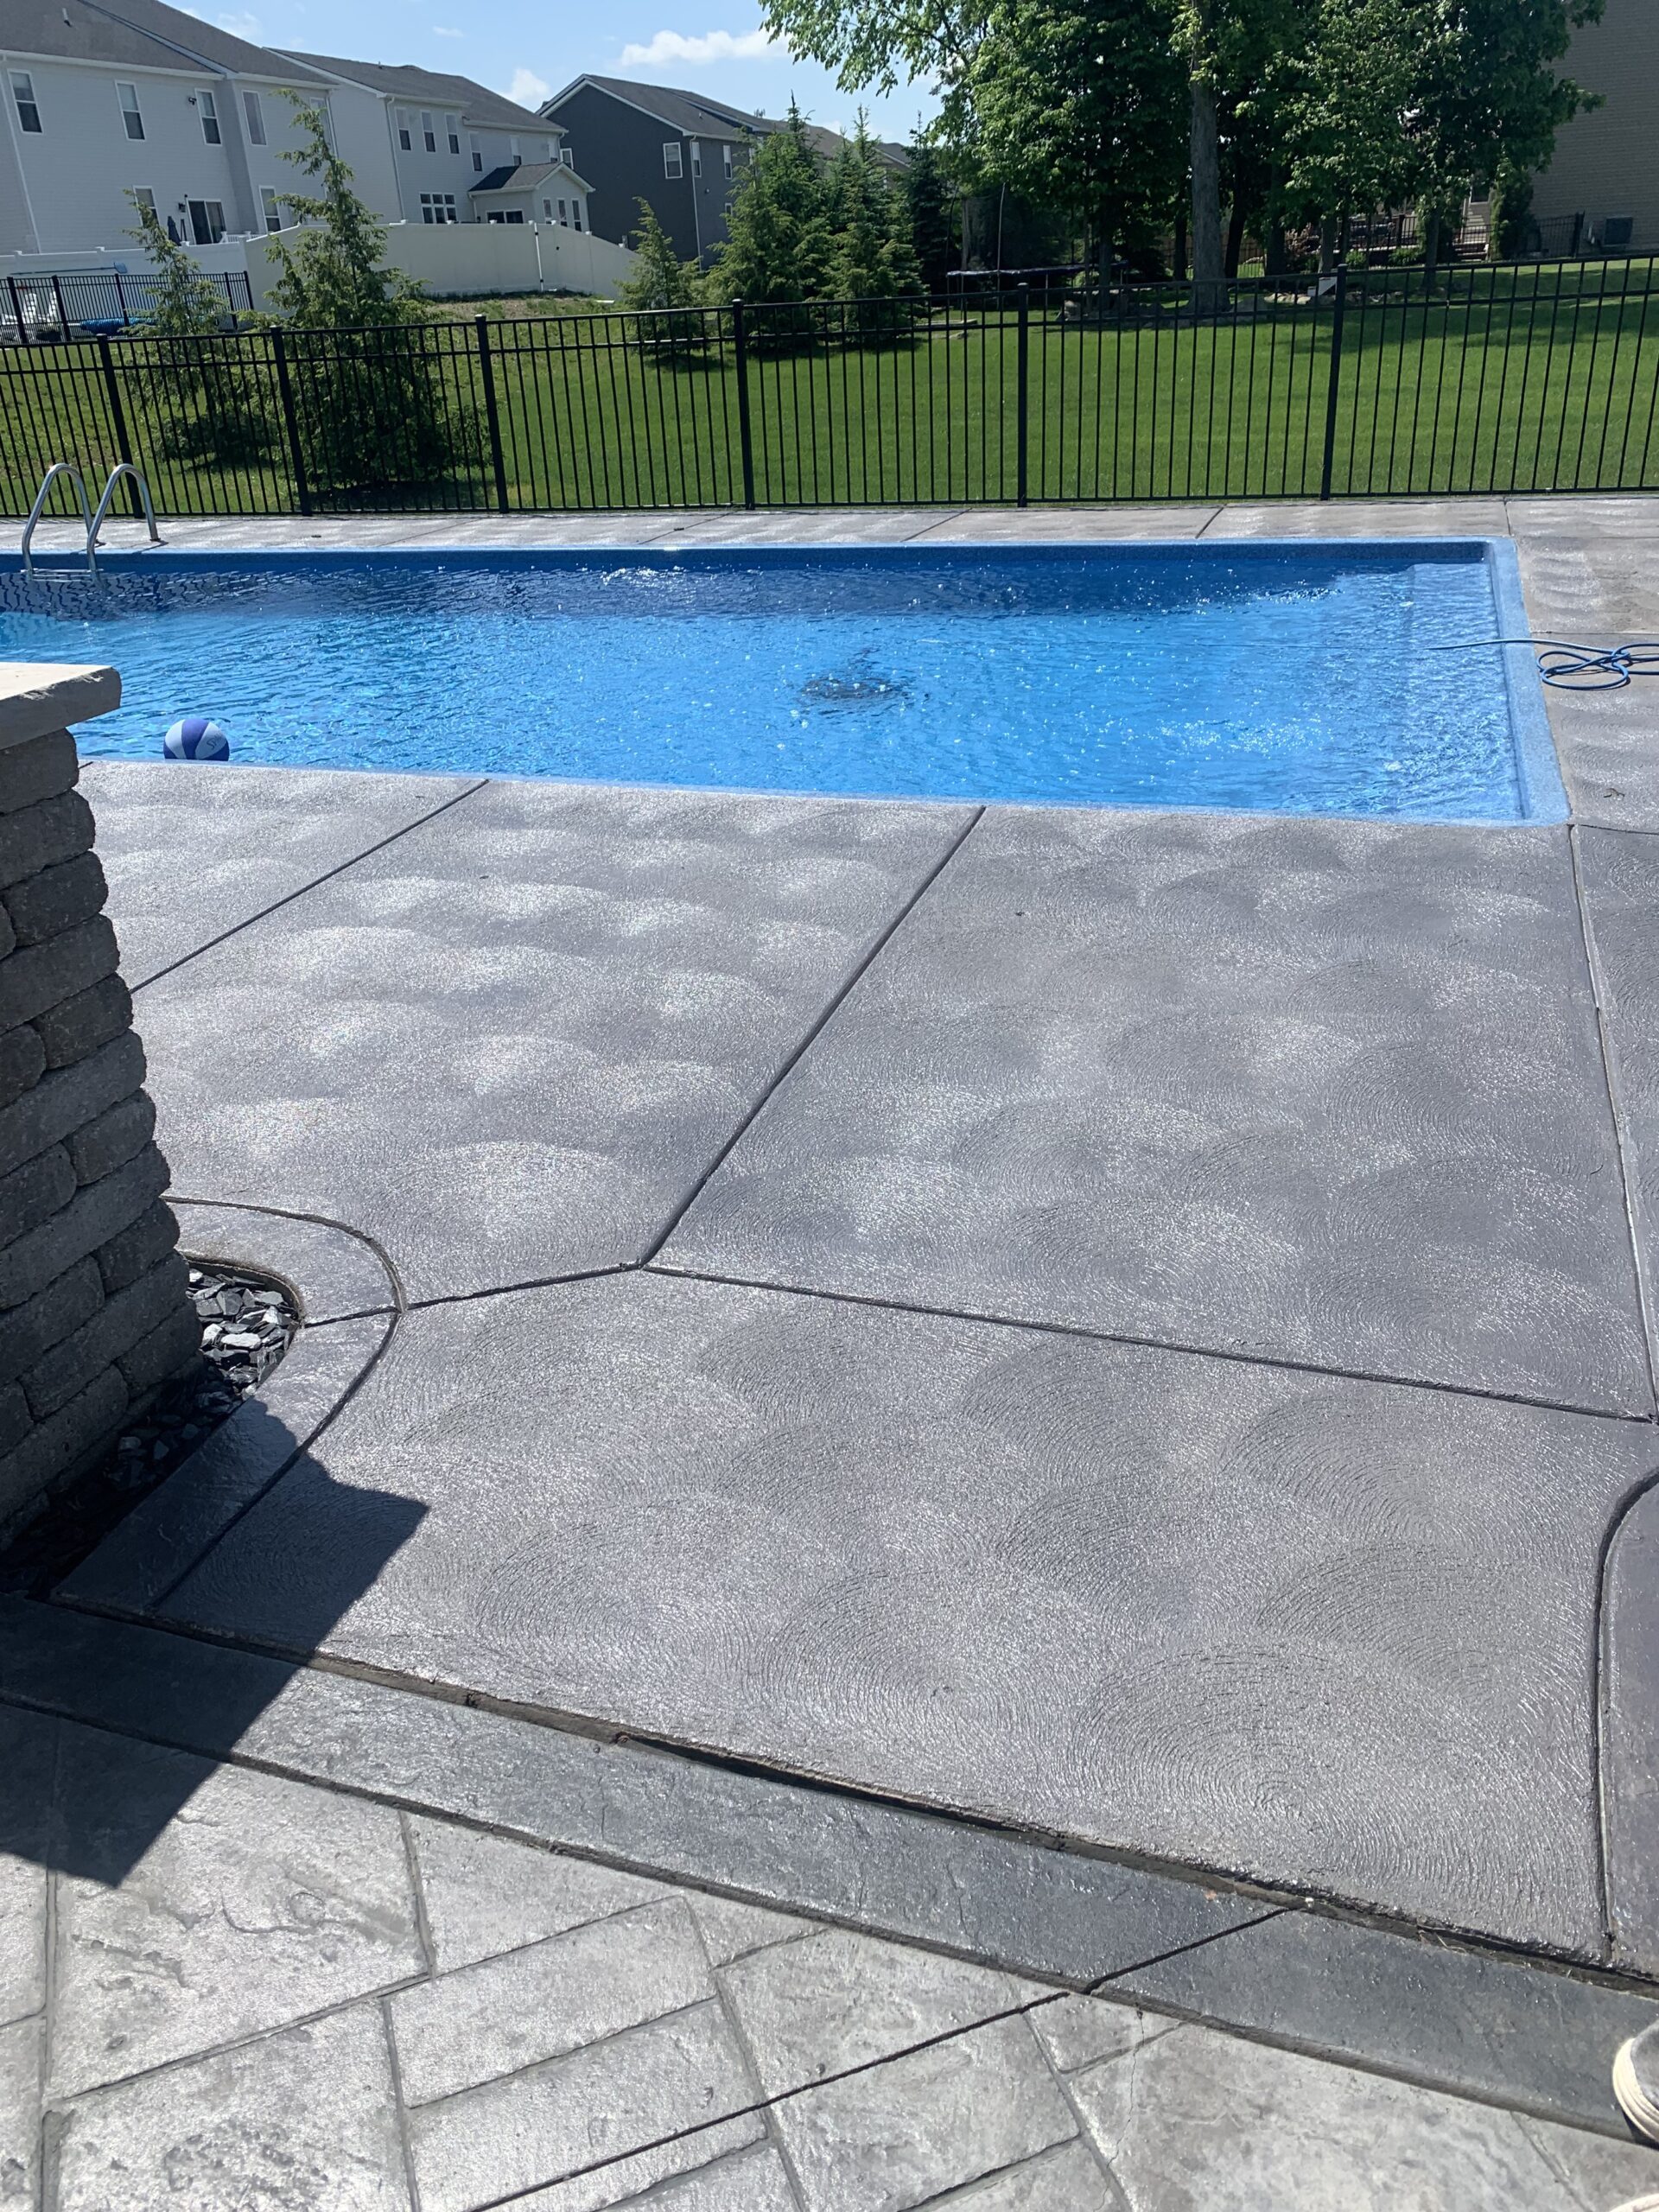 Stained swirl finish concrete pool deck